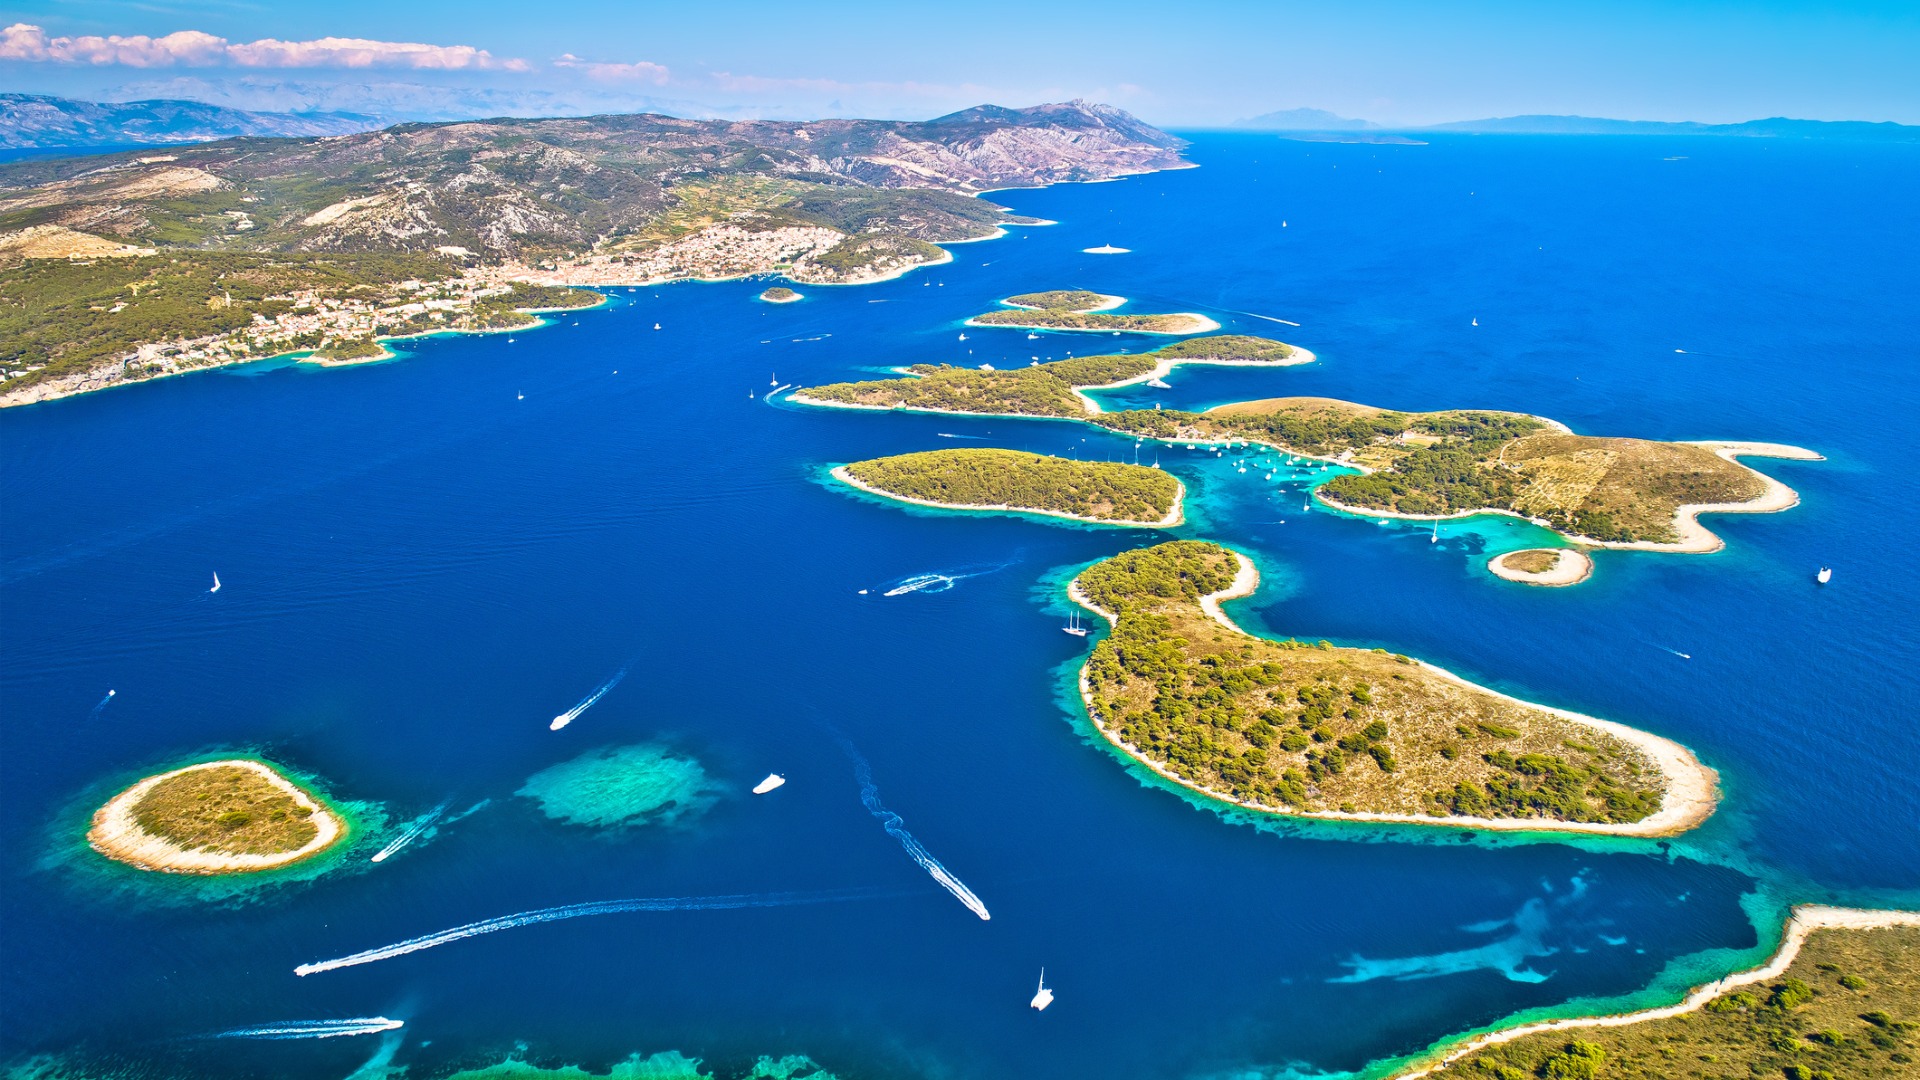 This is an aerial view of the Pakleni Islands, home to some of the best beaches in Hvar.